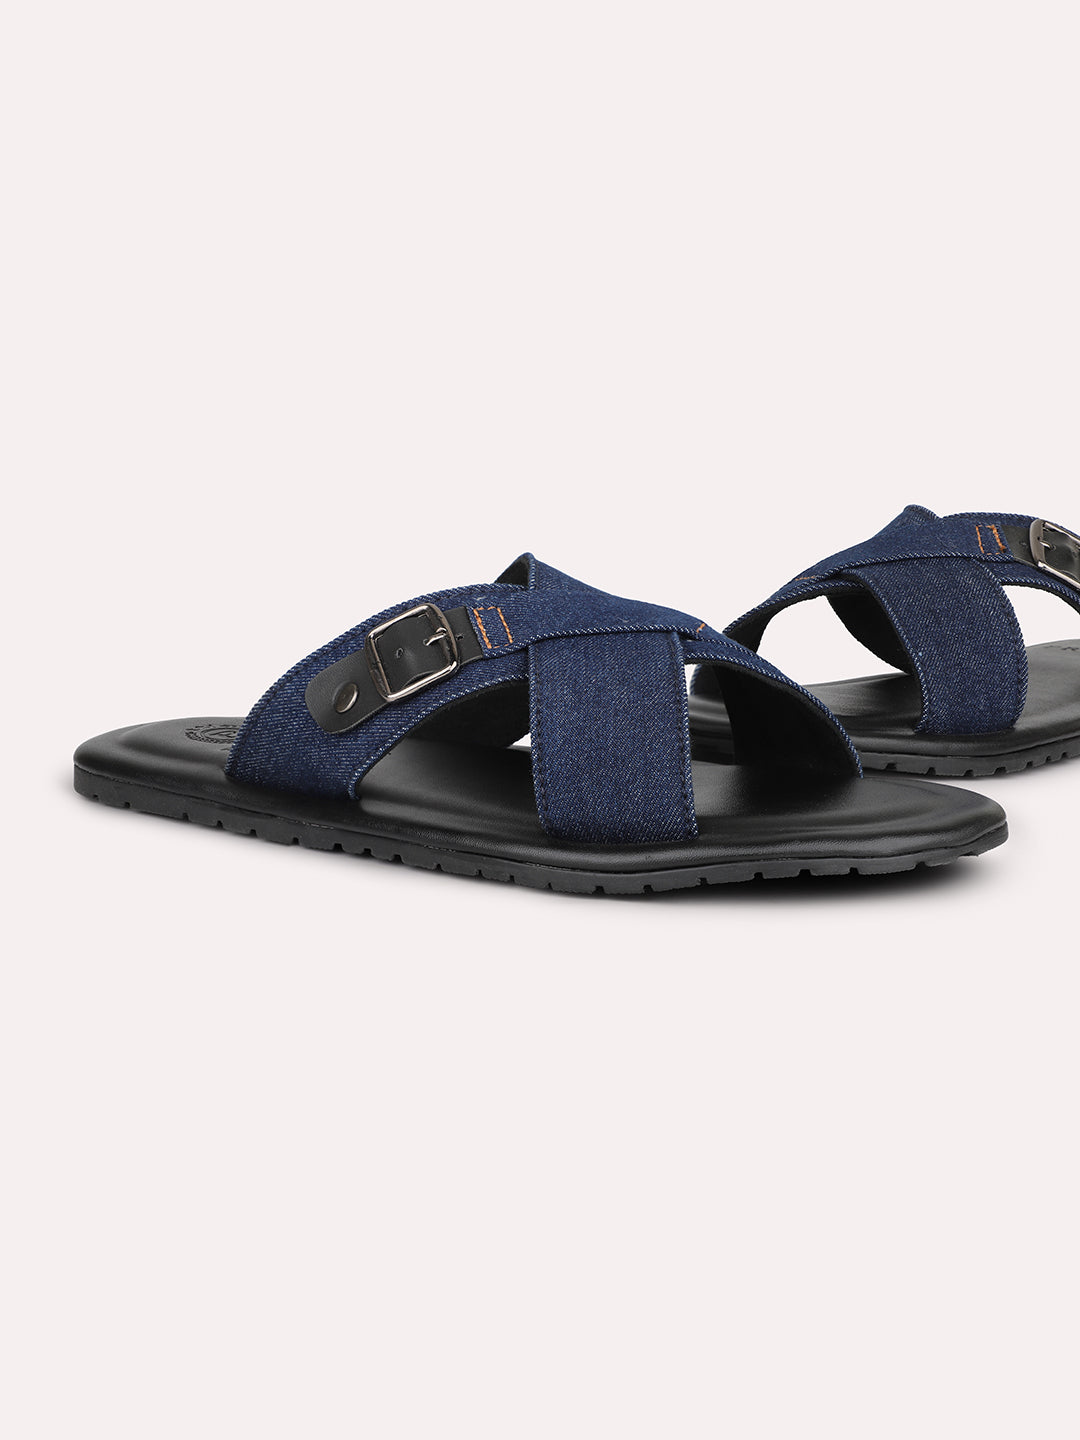 Privo Navy Denim Casual Sandal With Buckle For Men